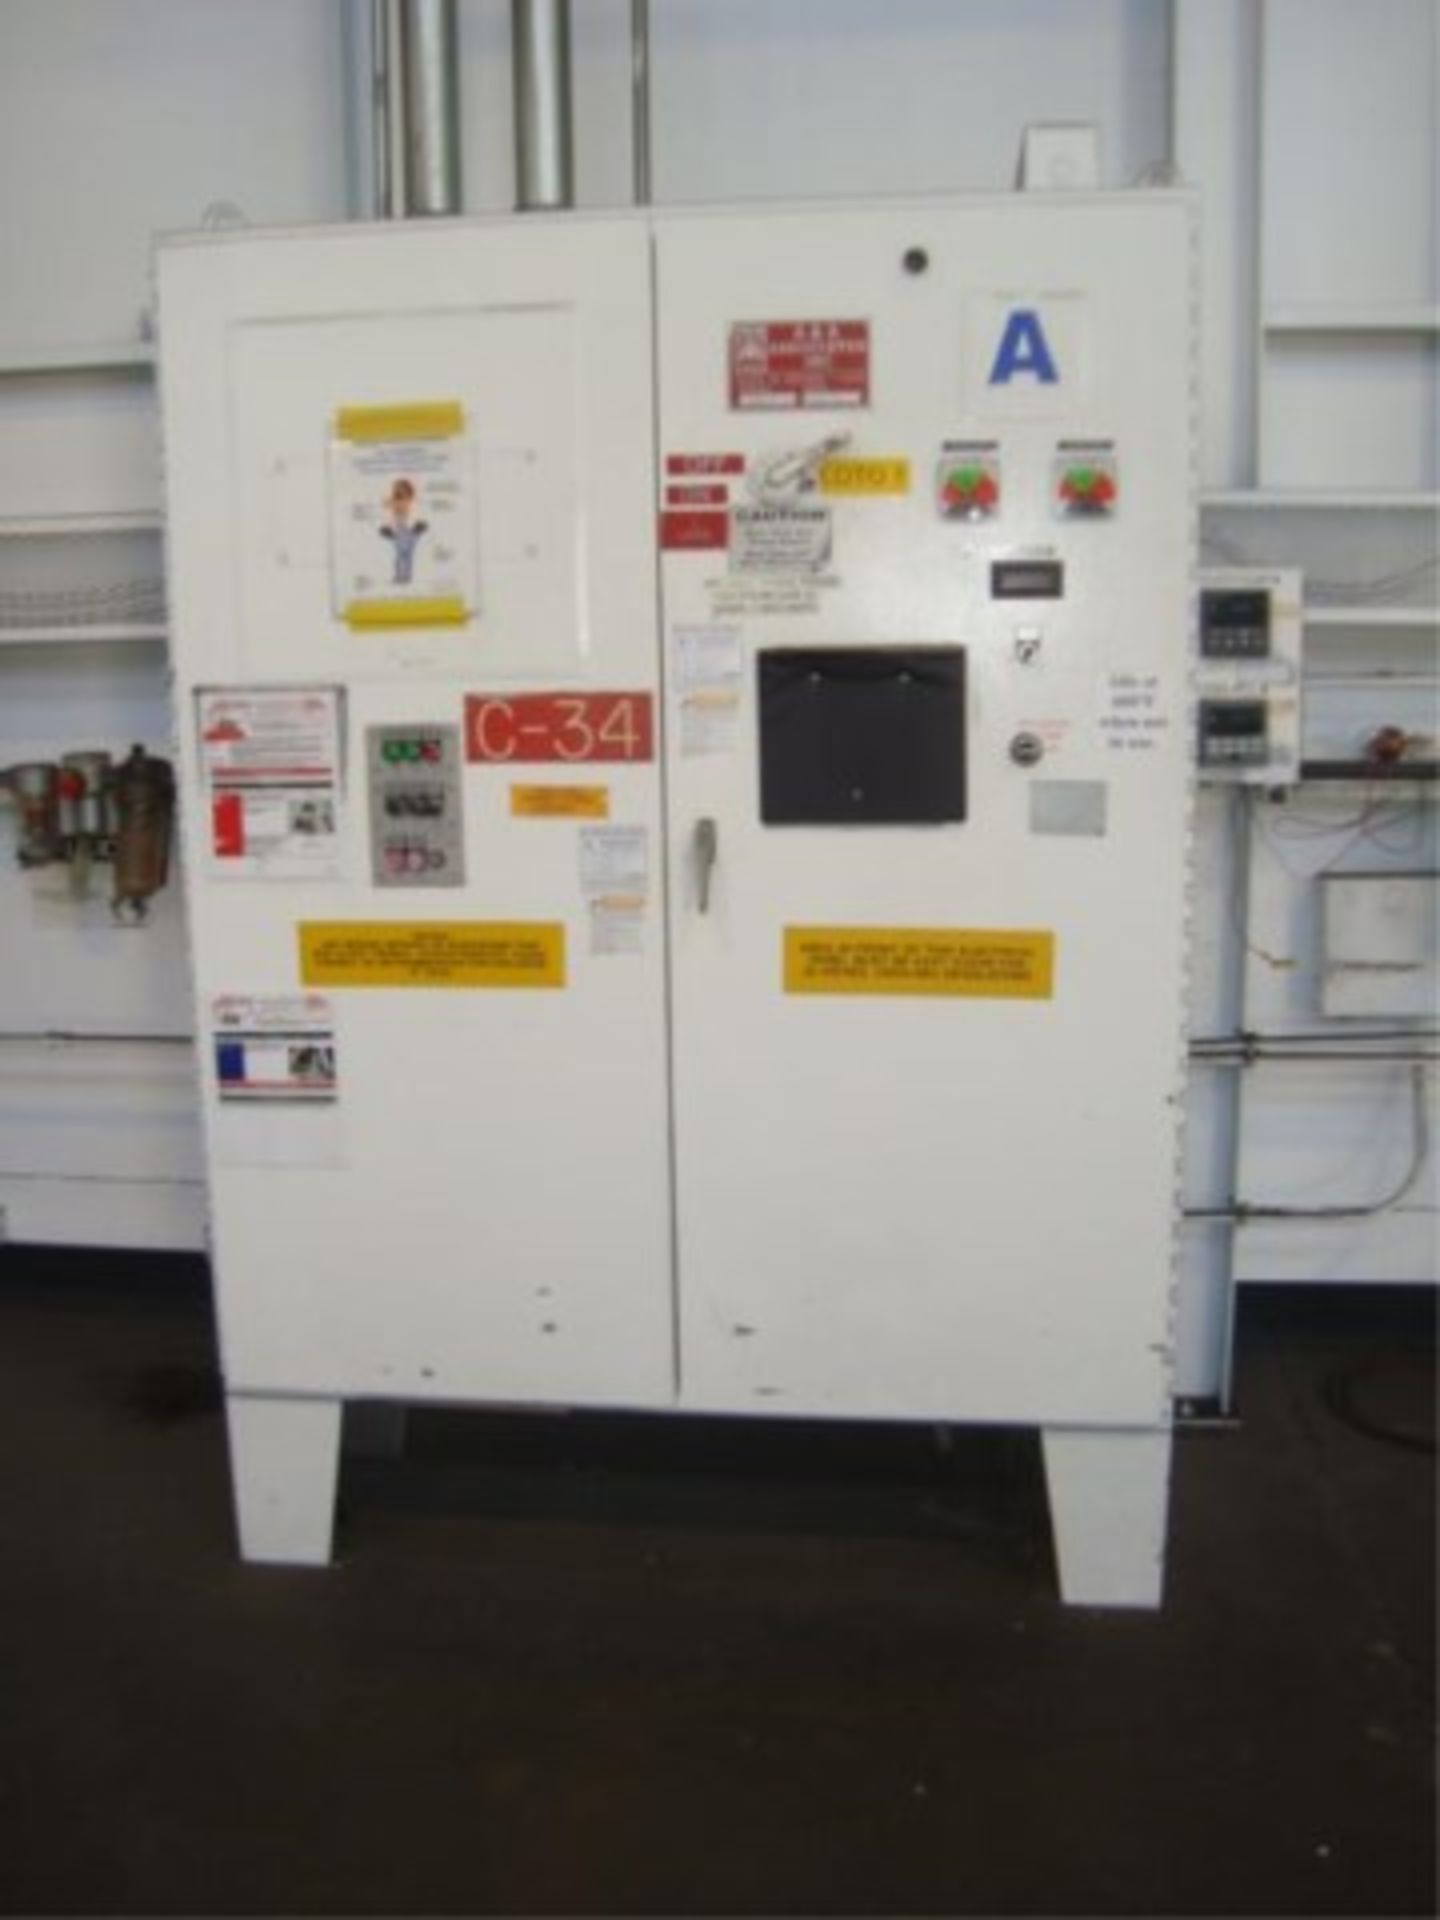 C-34 Oven - Image 10 of 14